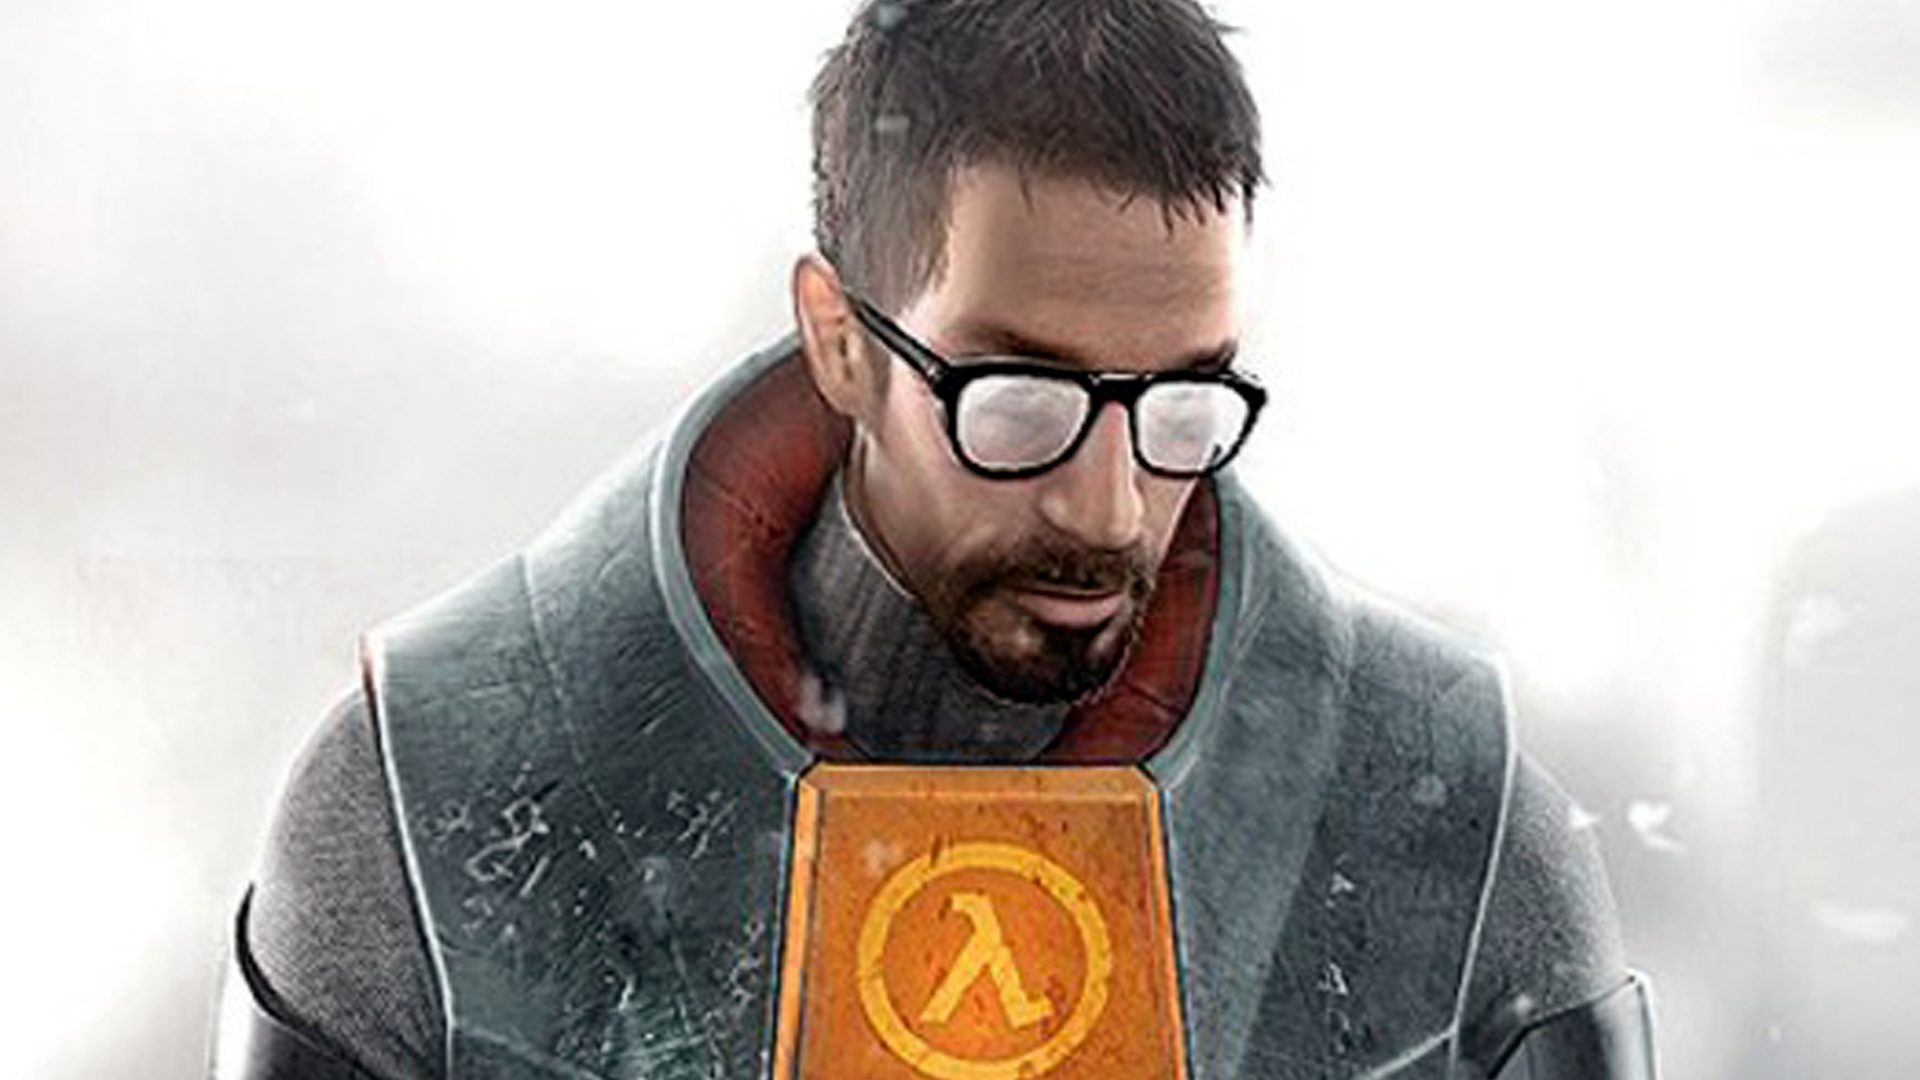 Half-Life 3 reportedly 